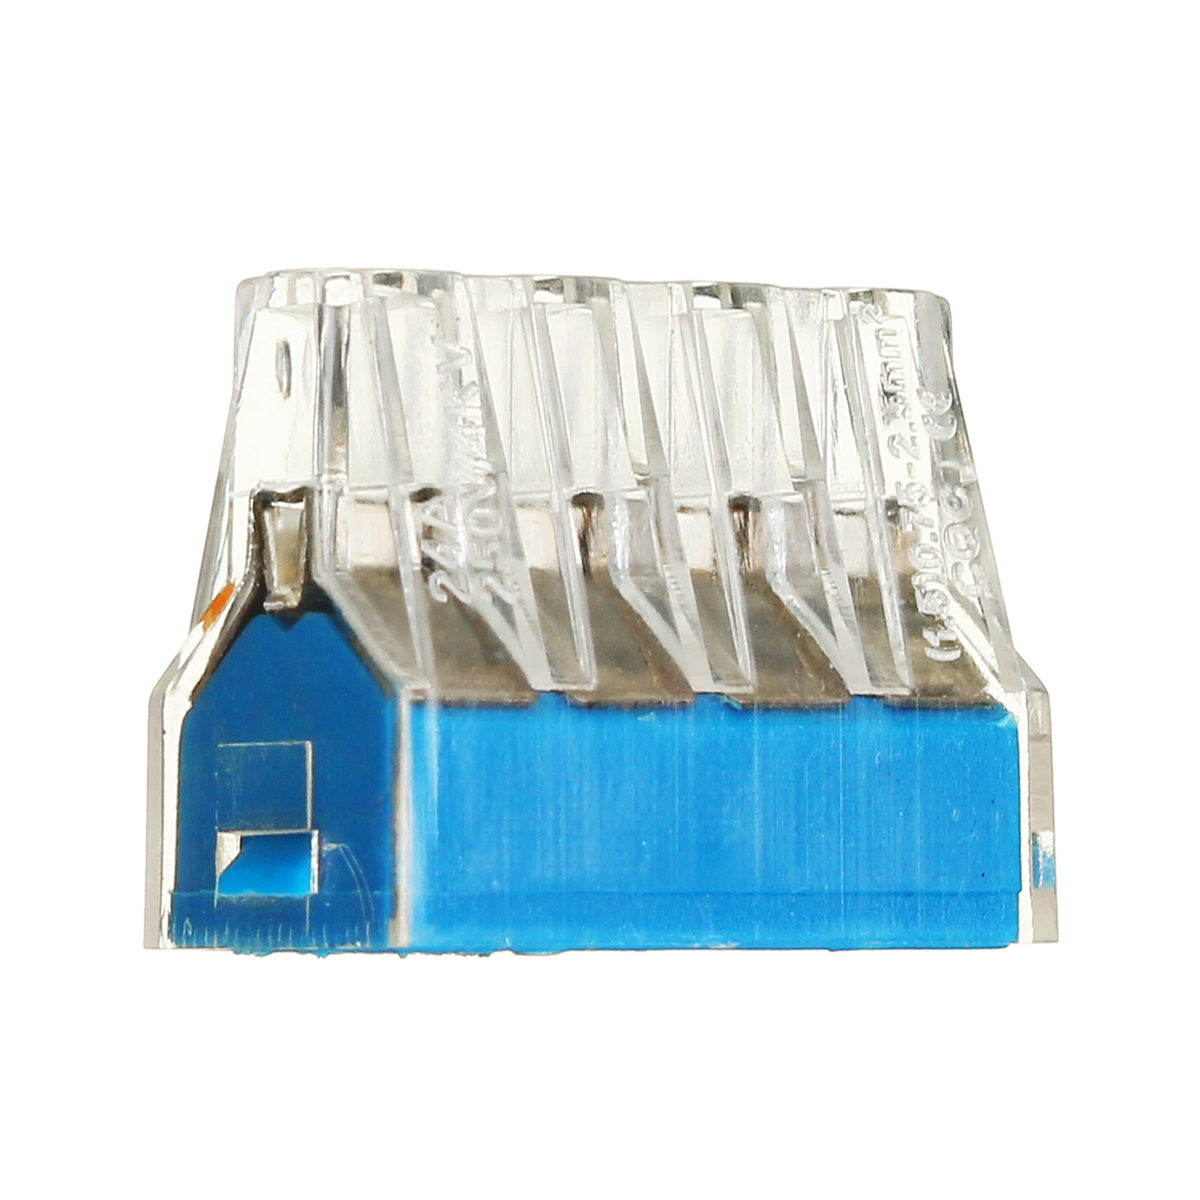 10Pcs-8-Holes-Universal-Compact-Terminal-Block-Electric-Cable-Wire-Connector-1384417-9